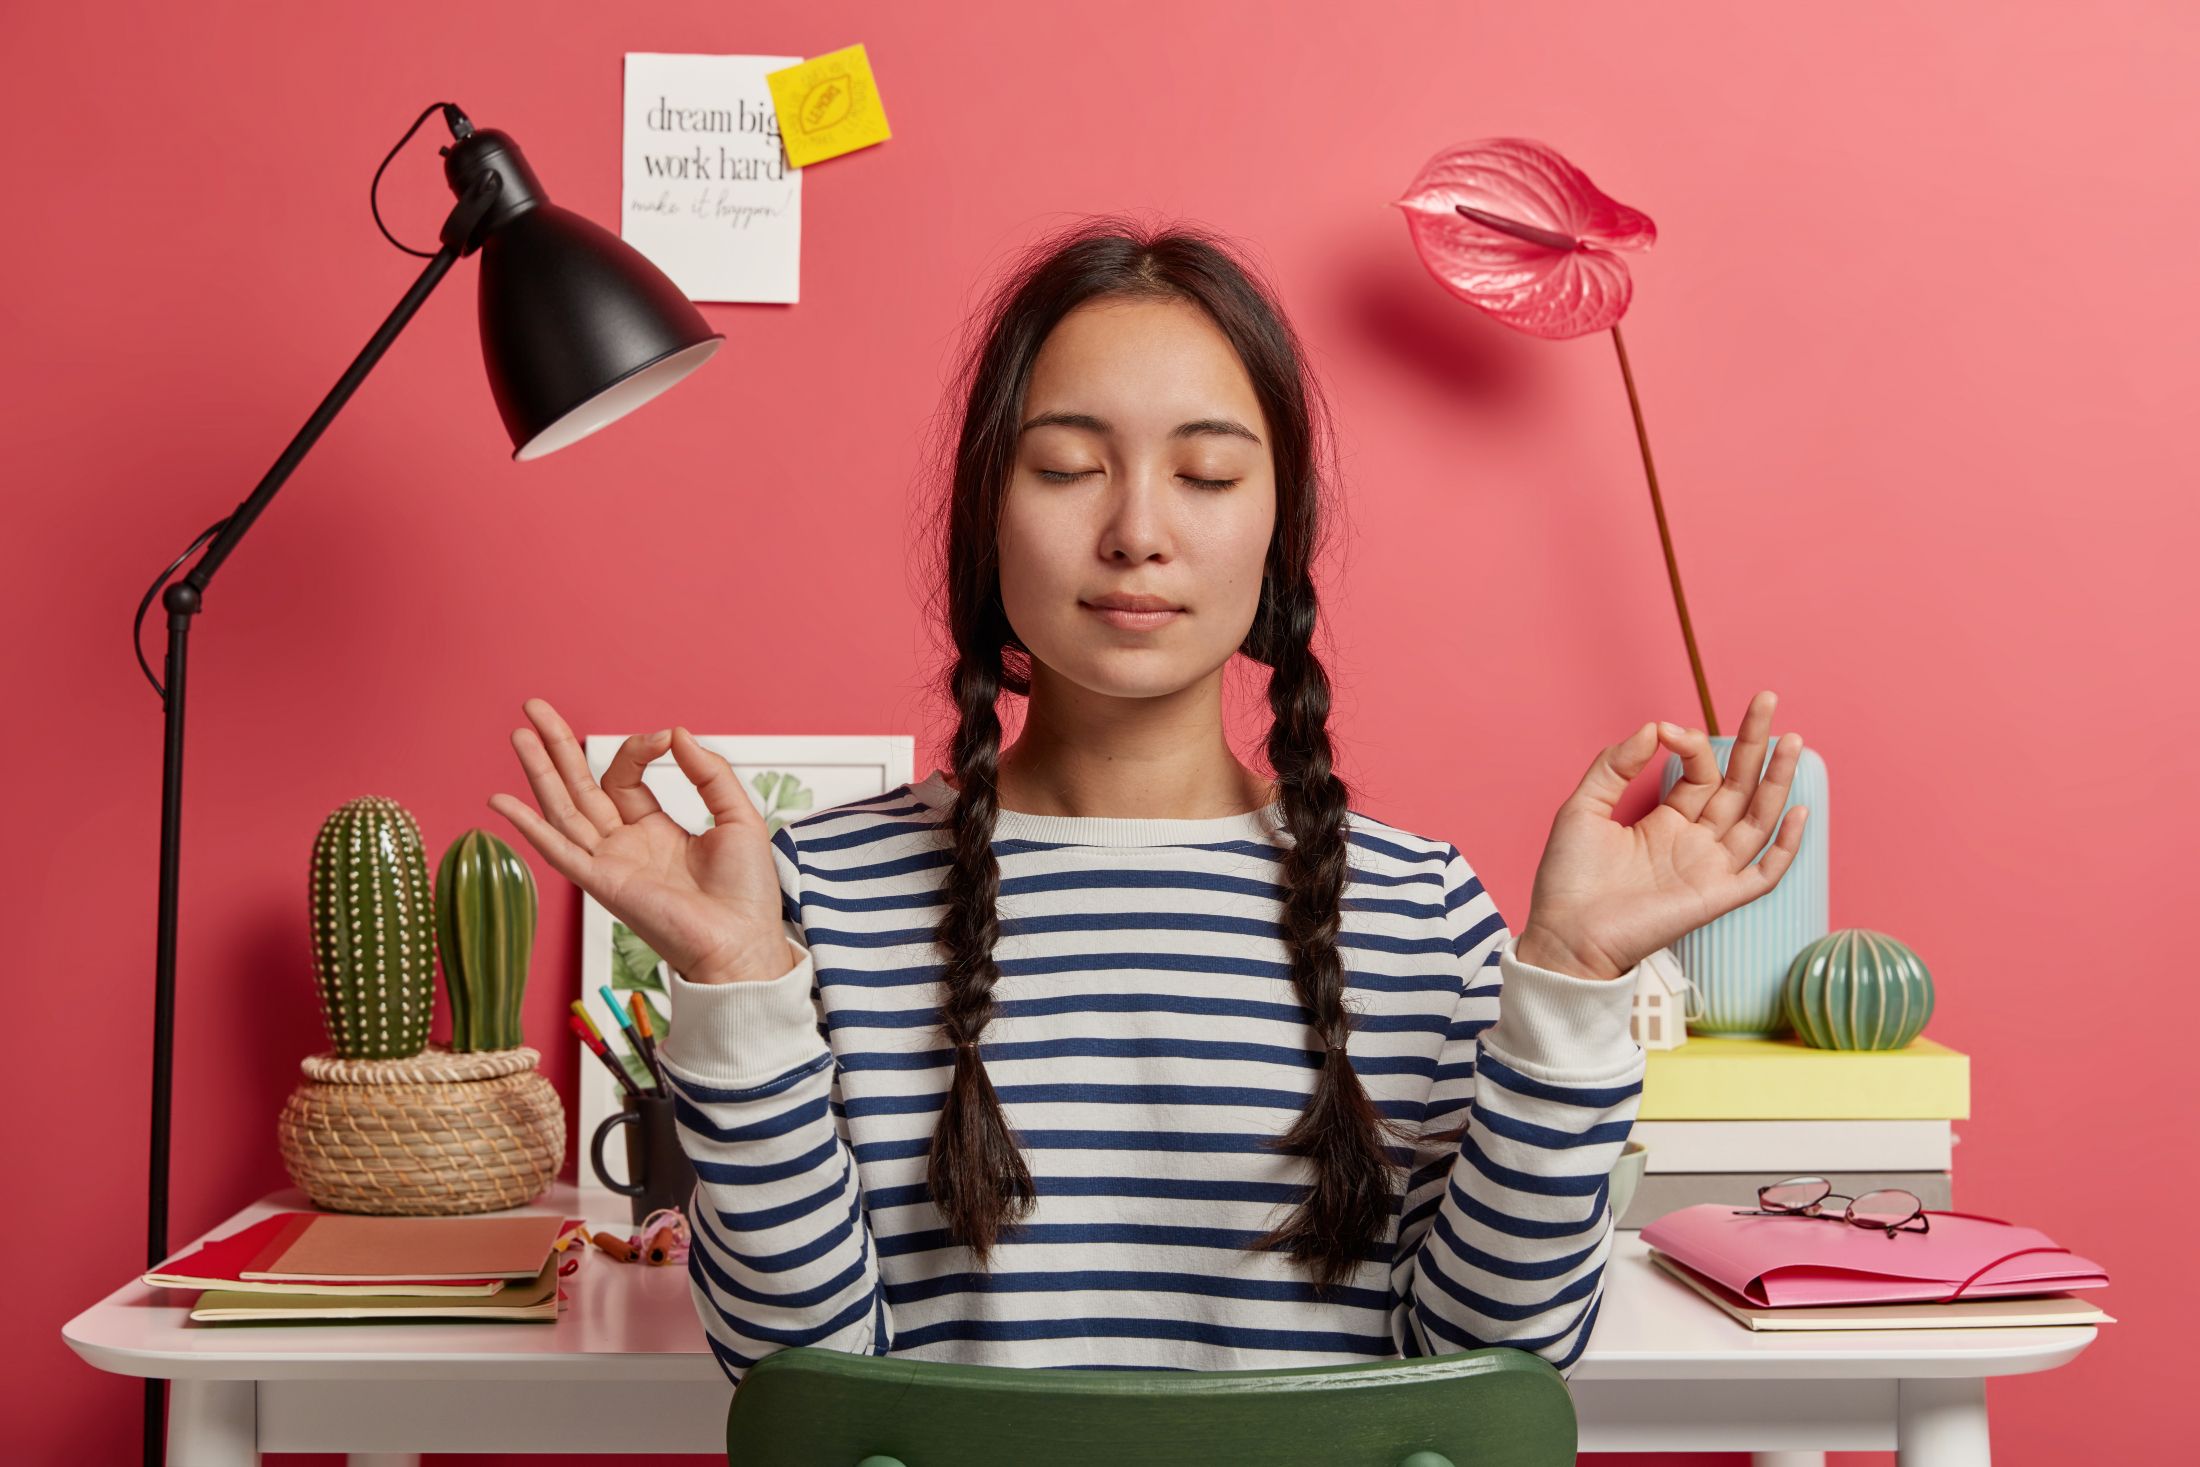 relaxed-asian-woman-meditates-at-workplace-sits-in-zen-pose-against-desktop-with-flowers-desk-lamp-notepads-wears-striped-casual-jumper-tries-to-relax-after-work-isolated-over-pink-background (1).jpg